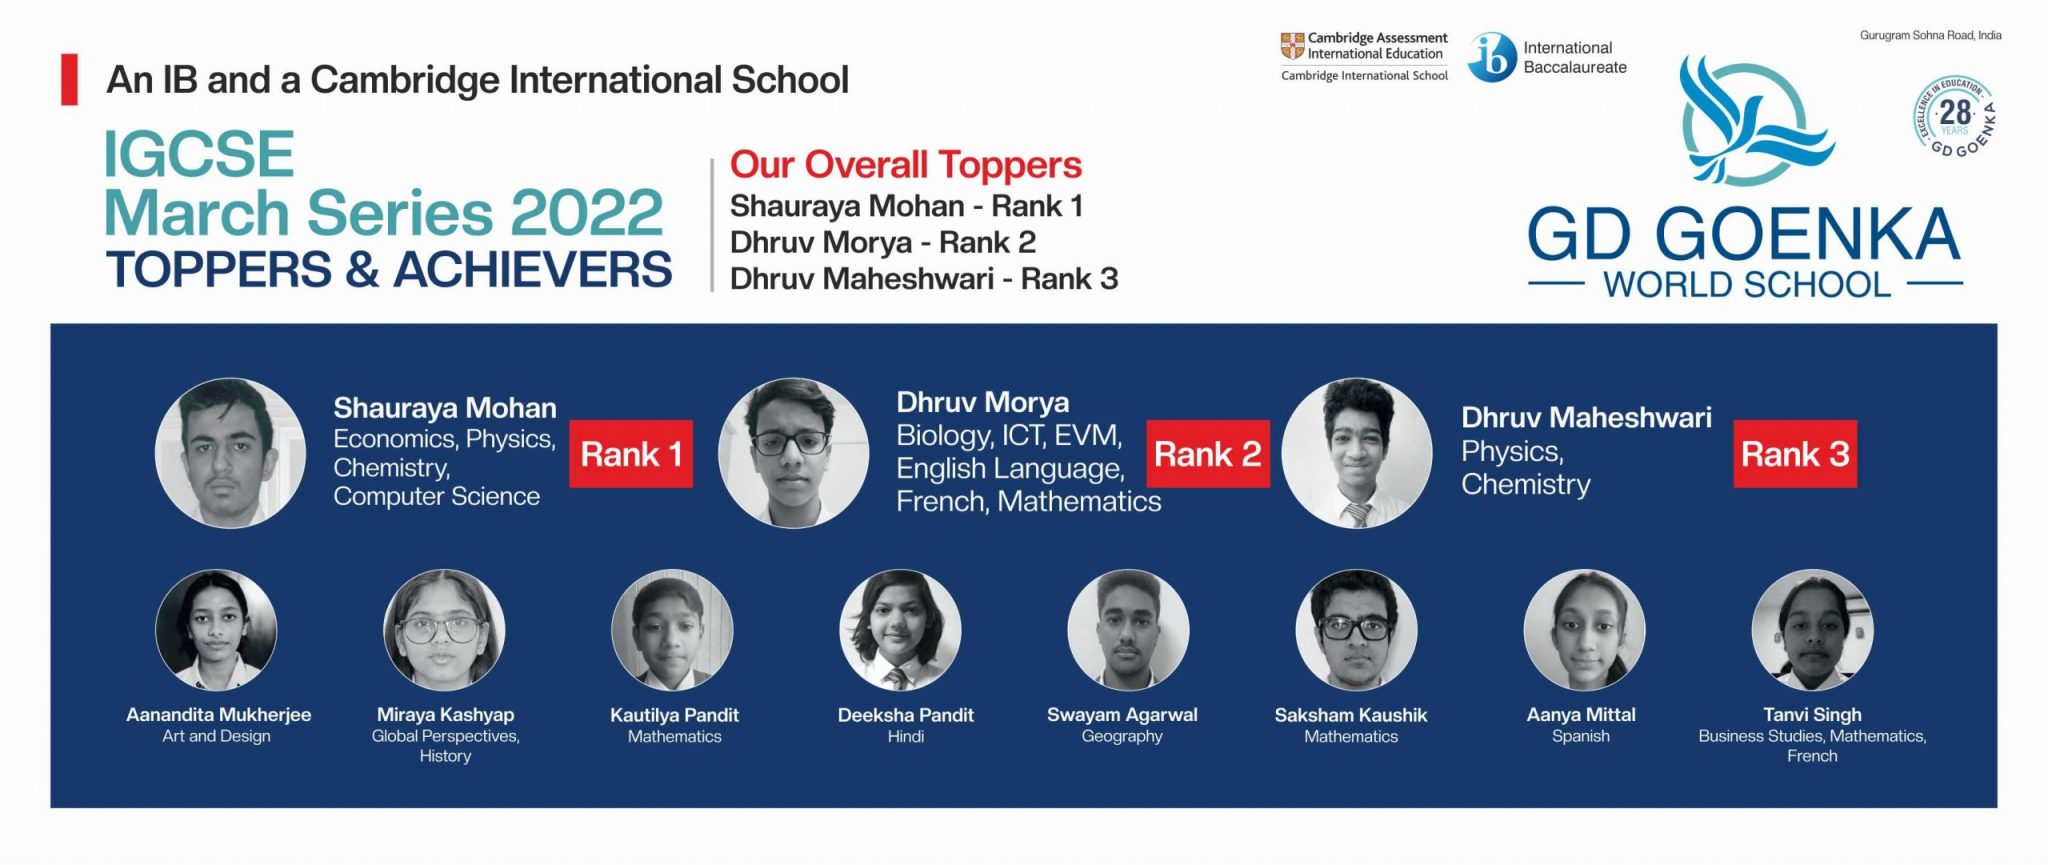 IGCSE Topper and Achievers